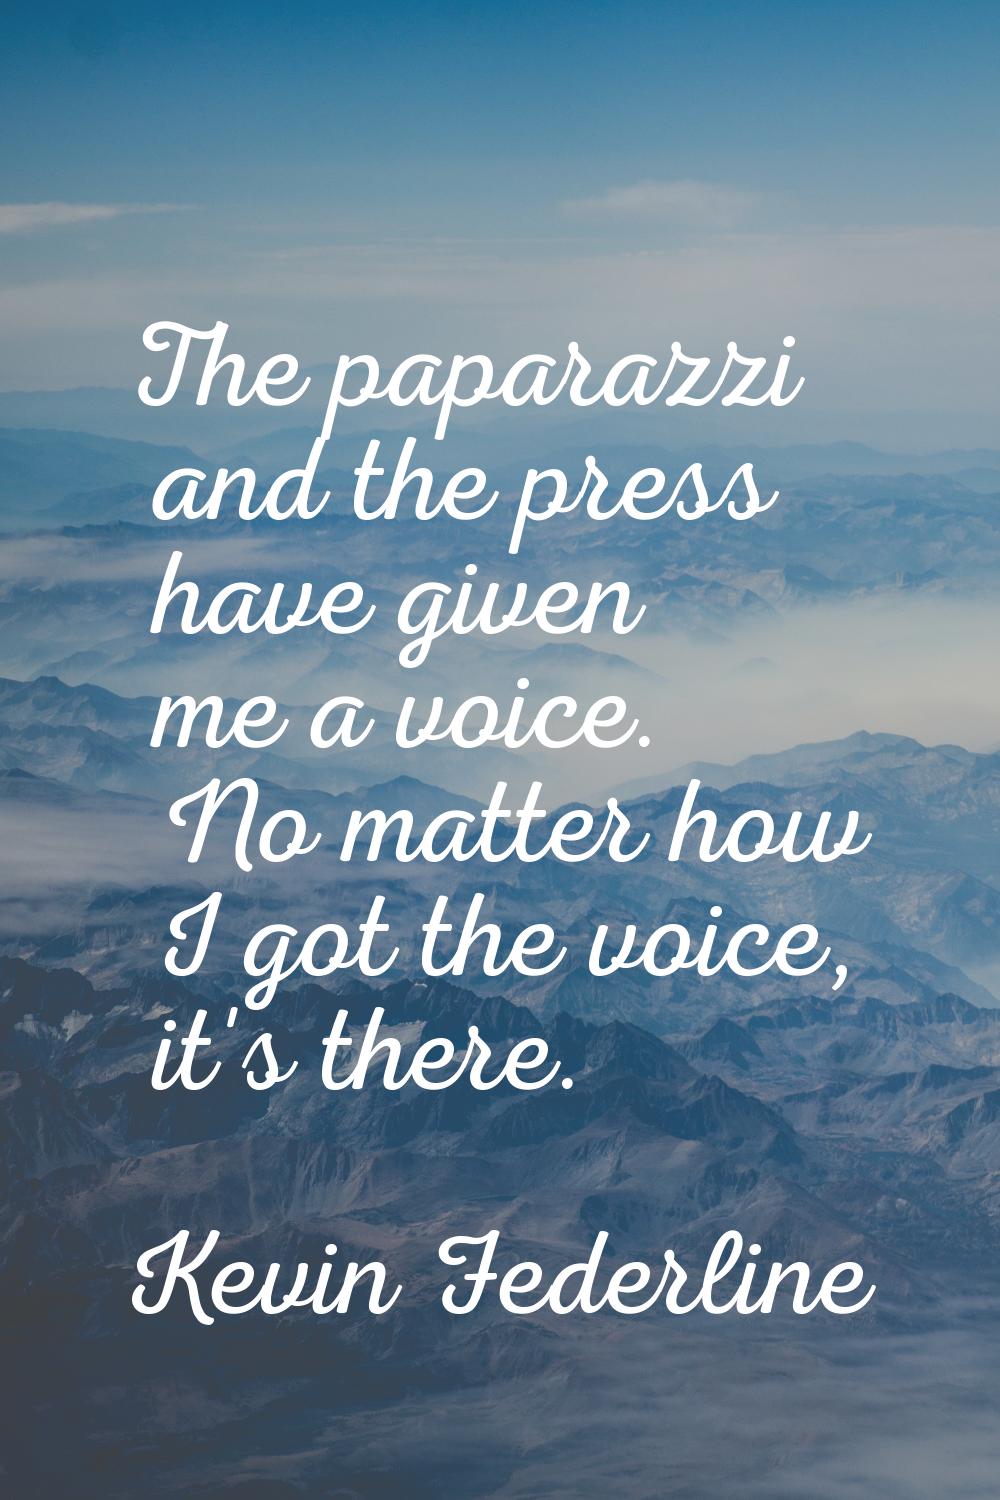 The paparazzi and the press have given me a voice. No matter how I got the voice, it's there.